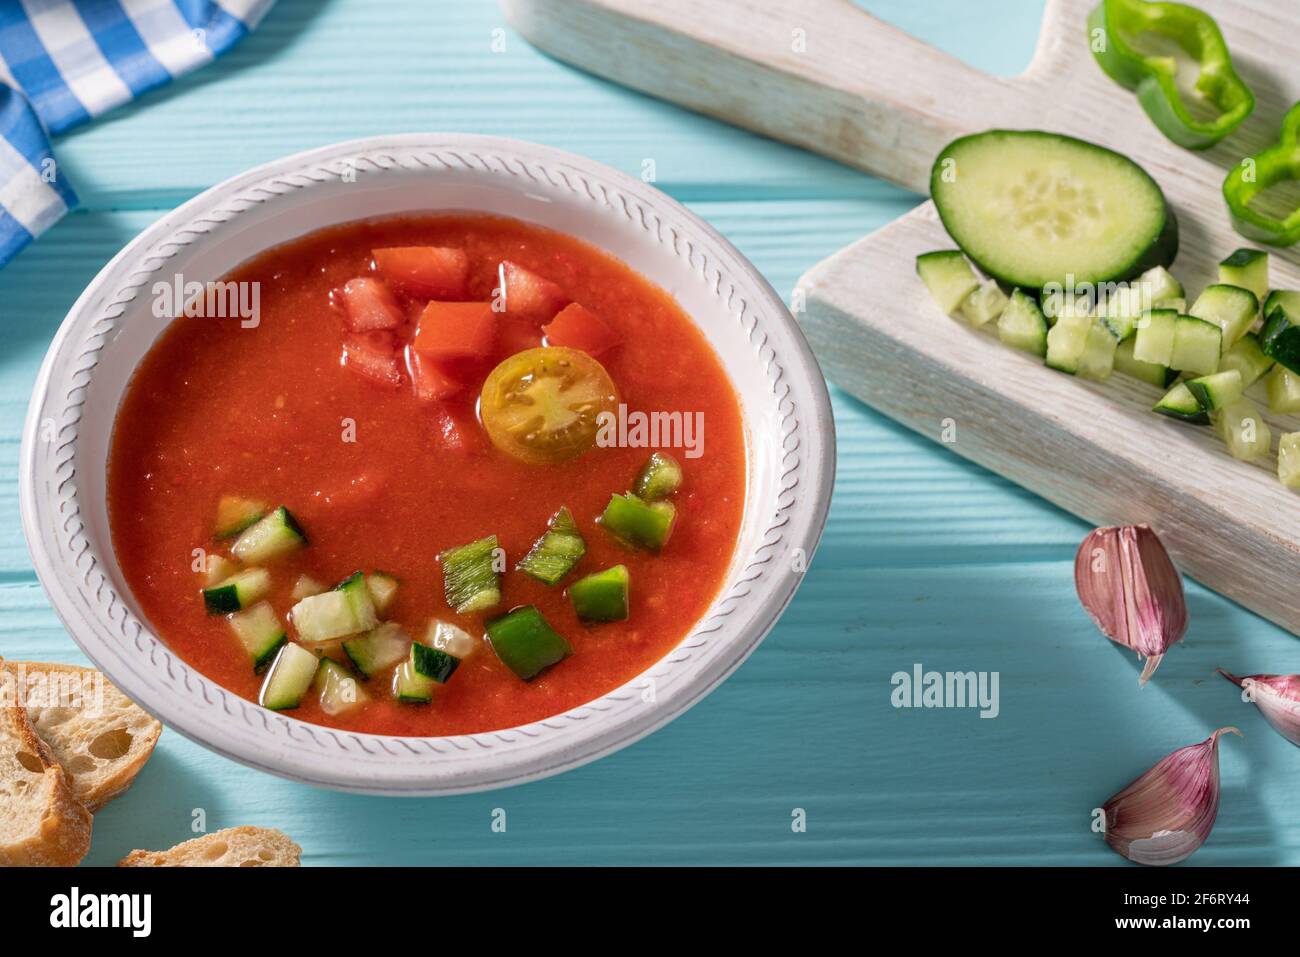 Gazpacho Andaluz is an Andalusian tomato cold soup from Spain with cucumber, garlic, pepper on light blue background. Stock Photo